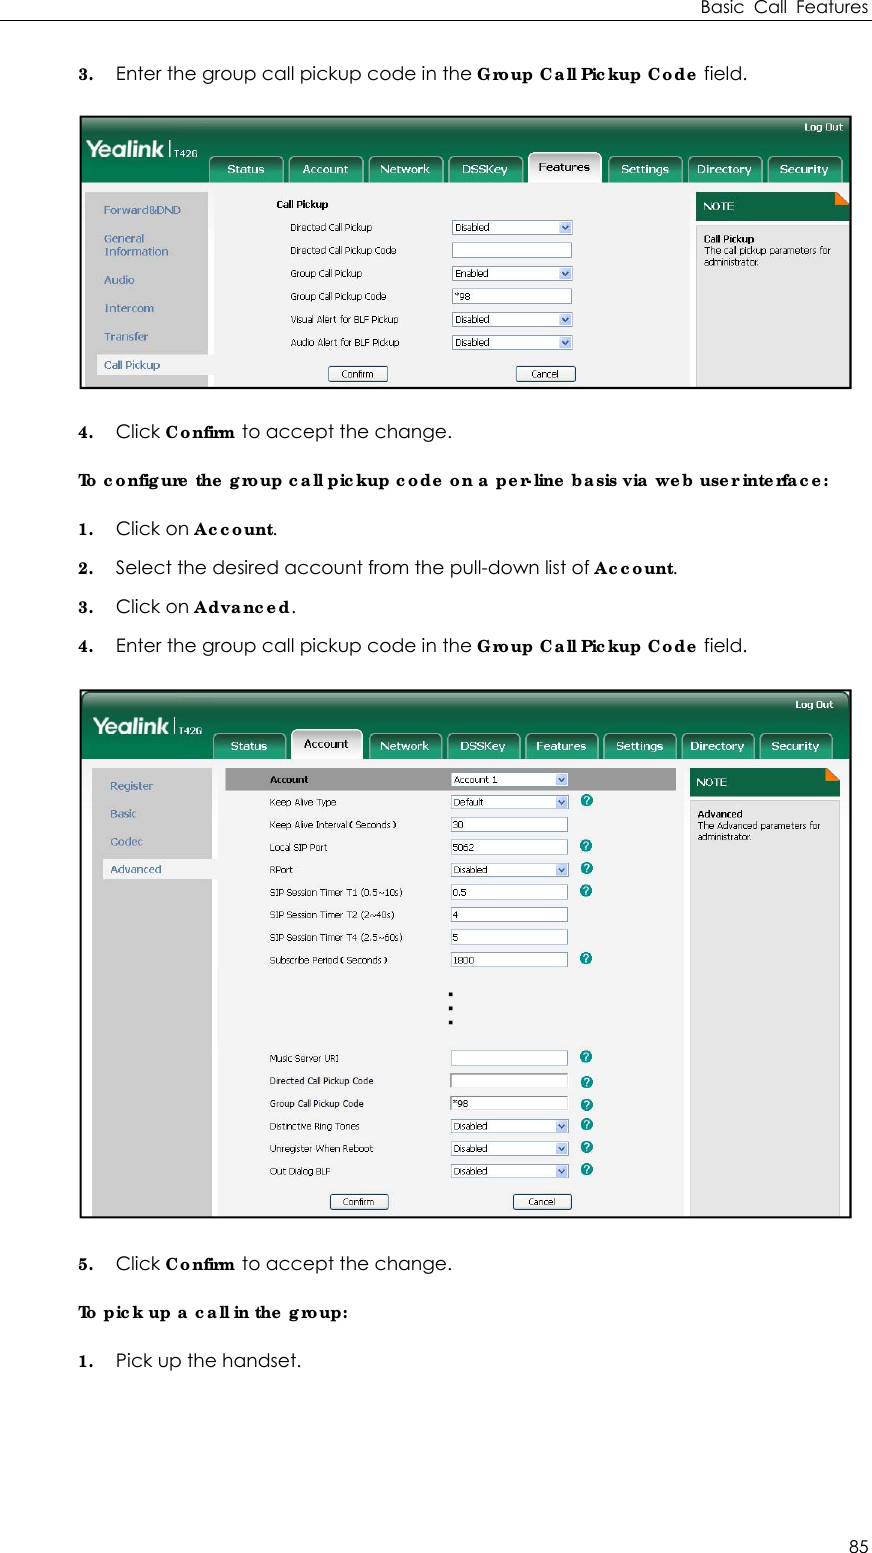 Basic Call Features 85 3. Enter the group call pickup code in the Group Call Pickup Code field.  4. Click Confirm to accept the change. To configure the group call pickup code on a per-line basis via web user interface: 1. Click on Account. 2. Select the desired account from the pull-down list of Account. 3. Click on Advanced. 4. Enter the group call pickup code in the Group Call Pickup Code field.  5. Click Confirm to accept the change. To pick up a call in the group: 1. Pick up the handset.   